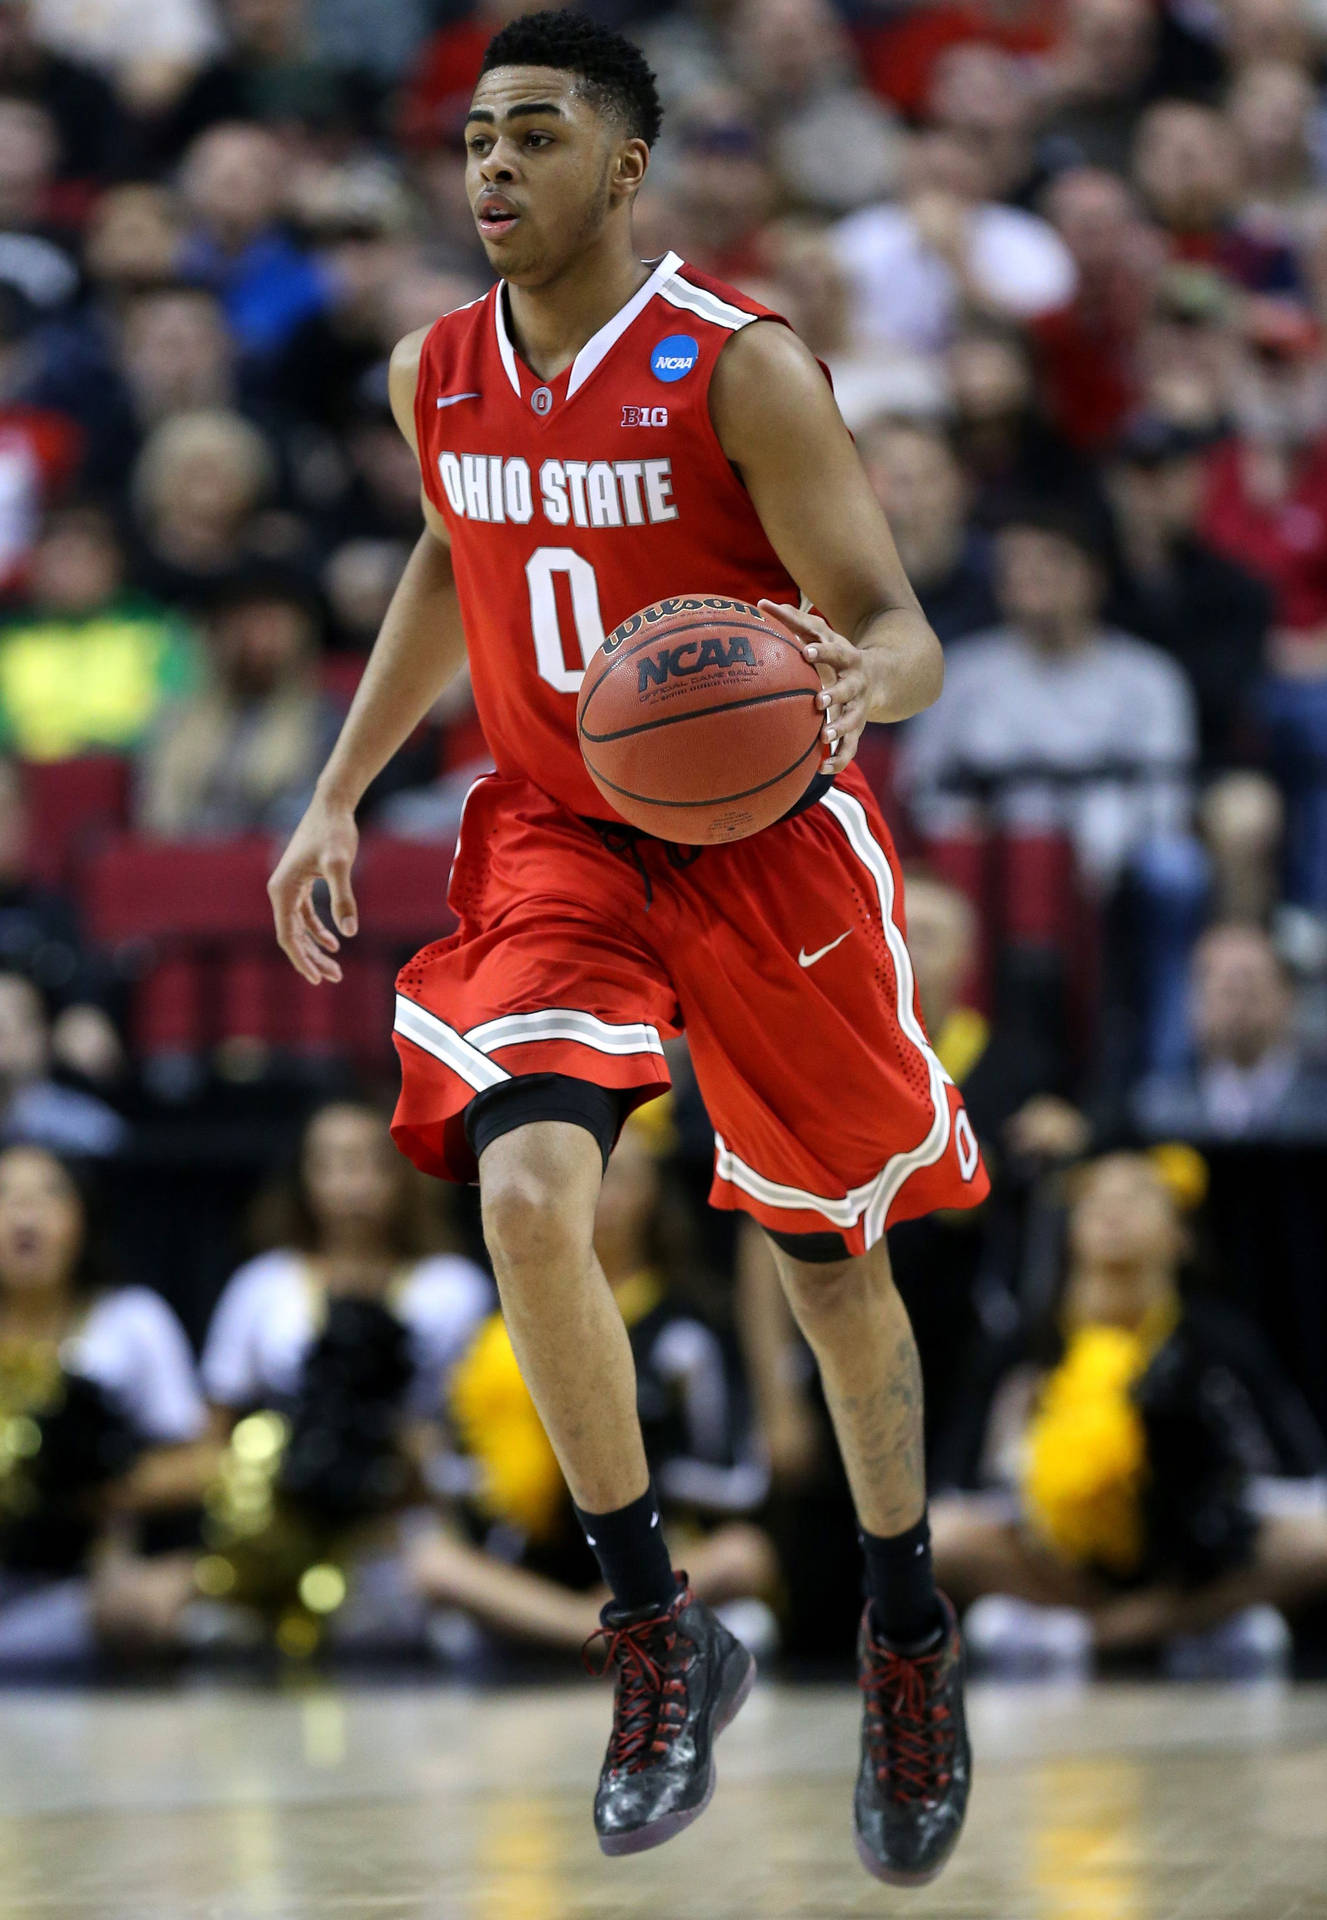 D'angelorussell Ohio State Buckeyes - D'angelo Russell Degli Ohio State Buckeyes. Sfondo